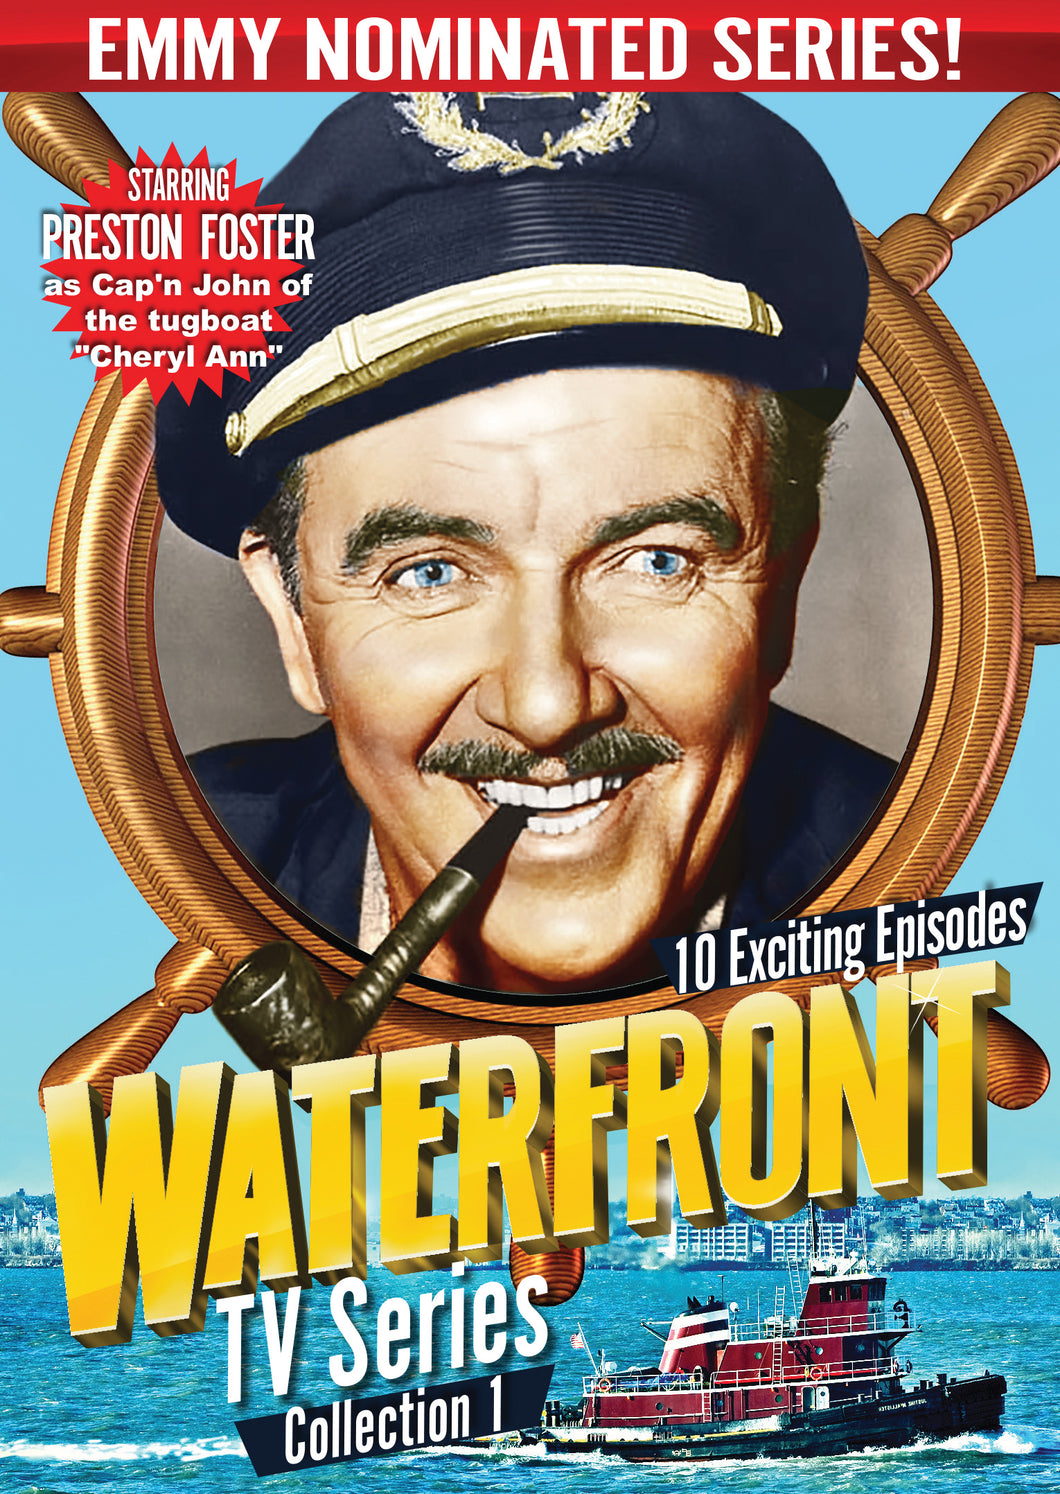 Waterfront Tv Series: Vol. Collection #1 (DVD)